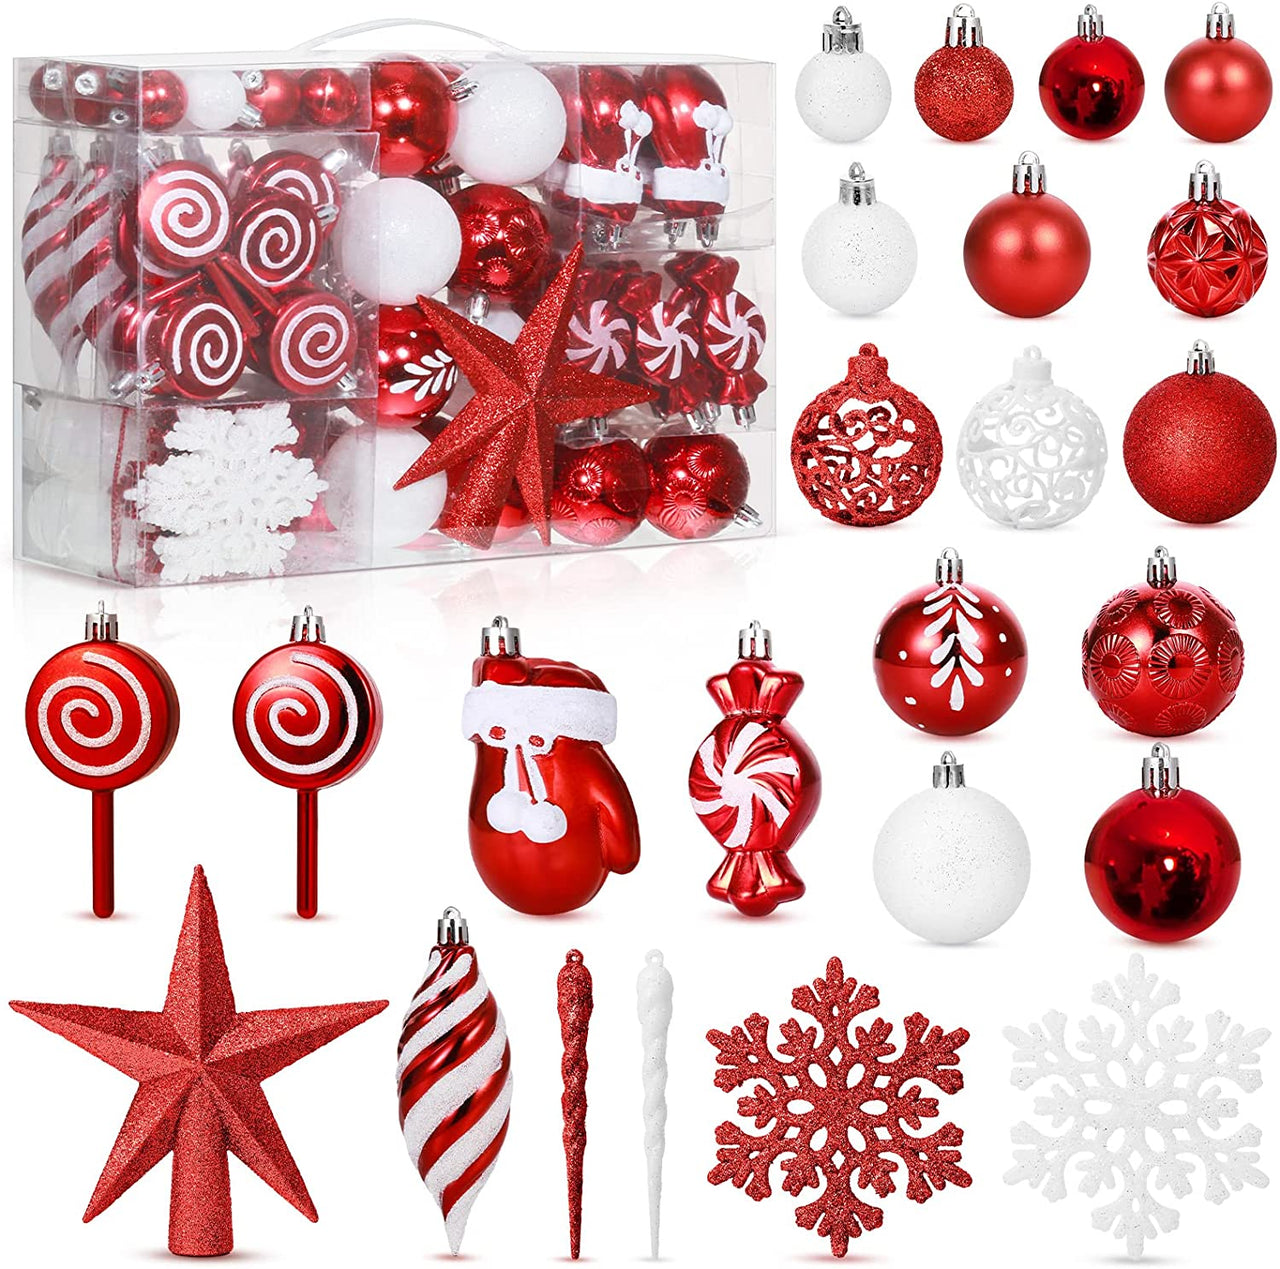 130 Pcs Christmas Tree Ornaments Set Assorted Hanging Ornaments Ball Set with Hanging Loop for Xmas Holiday Party Wreath Xmas Tree Decor